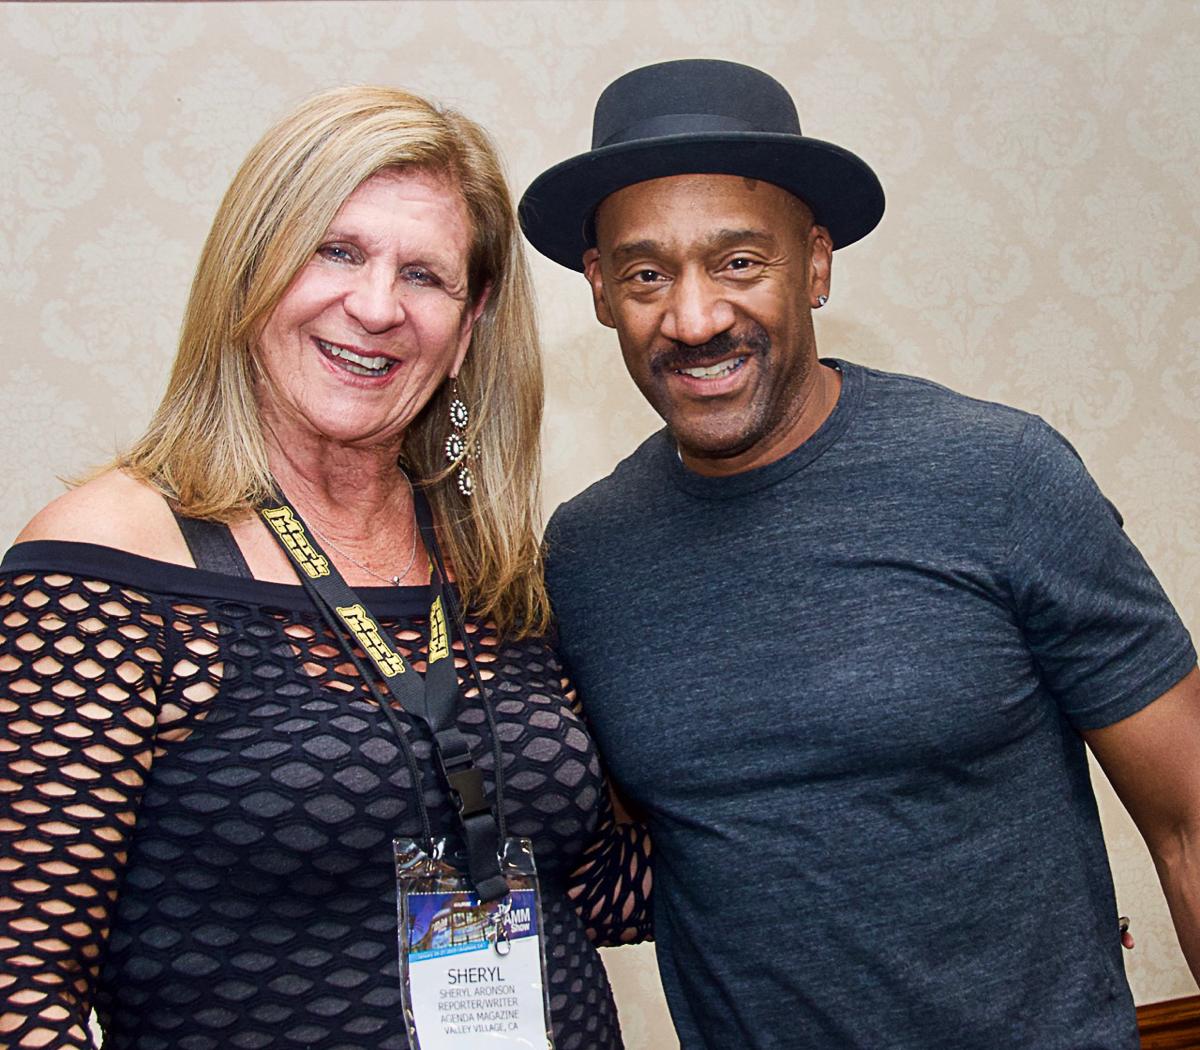 Sheryl Aronson with Marcus Miller at the Sire USA demonstration, during NAMM 2019